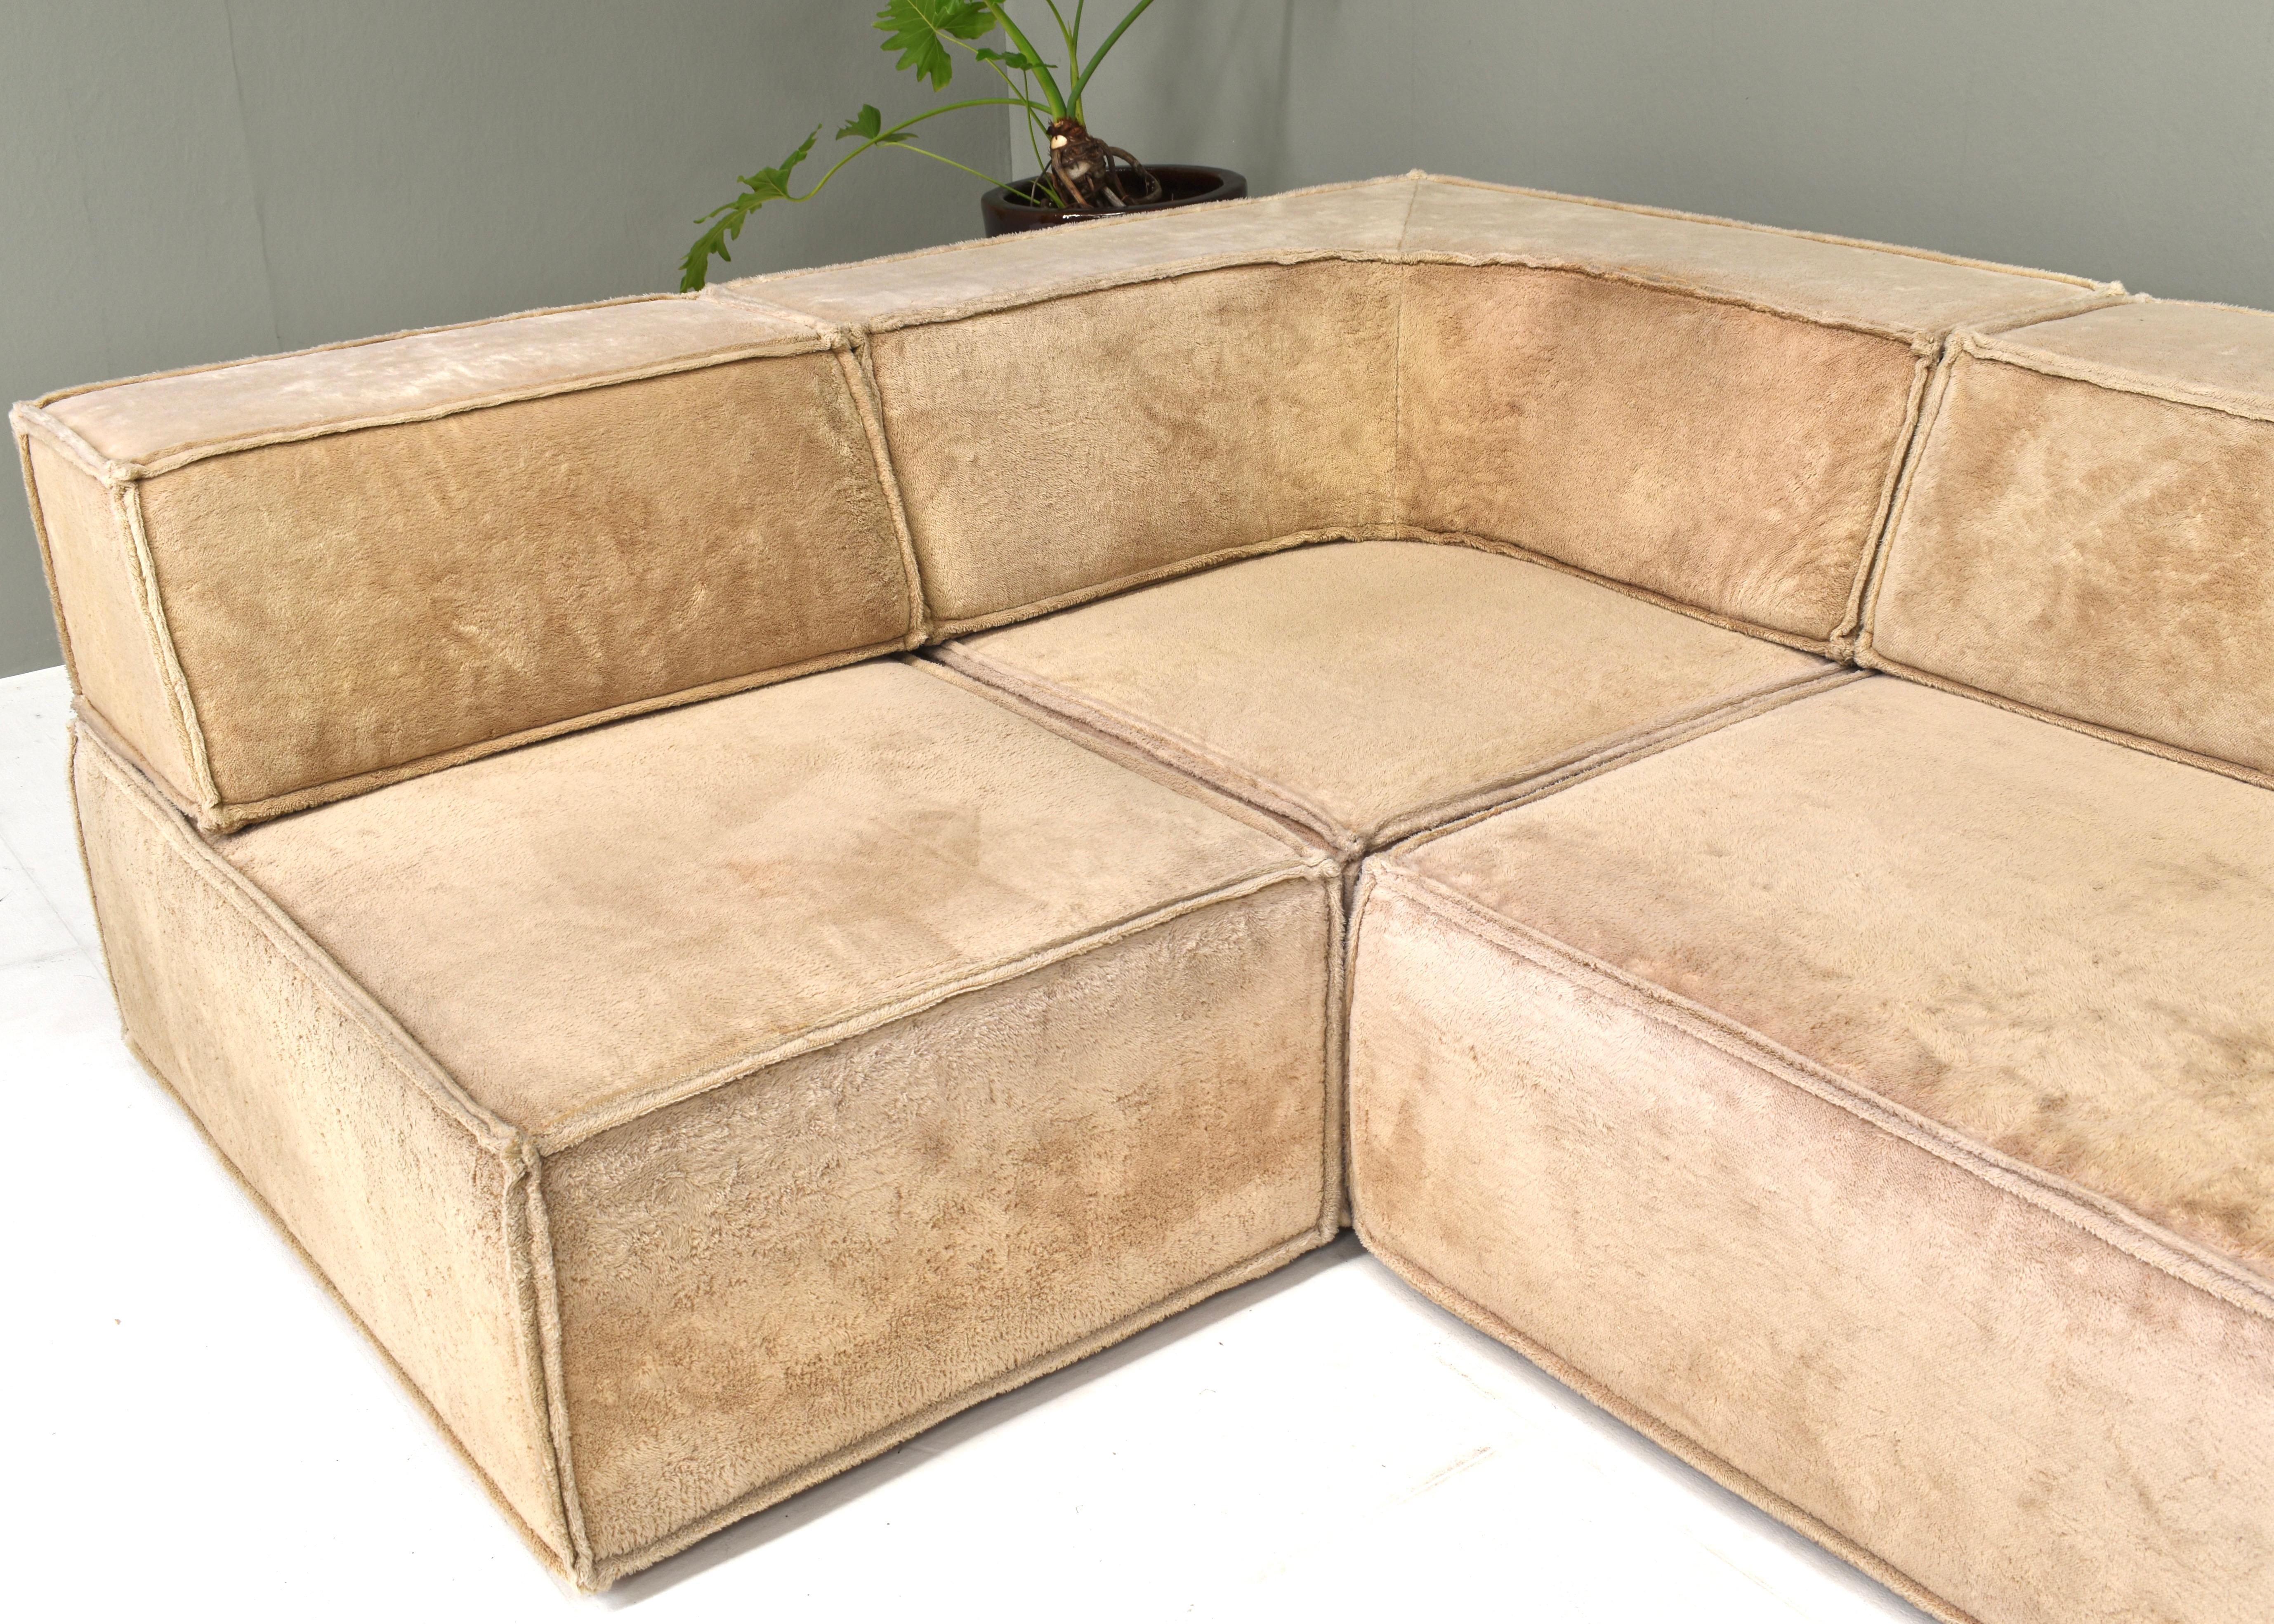 Mid-Century Modern COR Trio Sectional Sofa by Team Form Ag for COR, Germany / Switzerland, 1972 For Sale